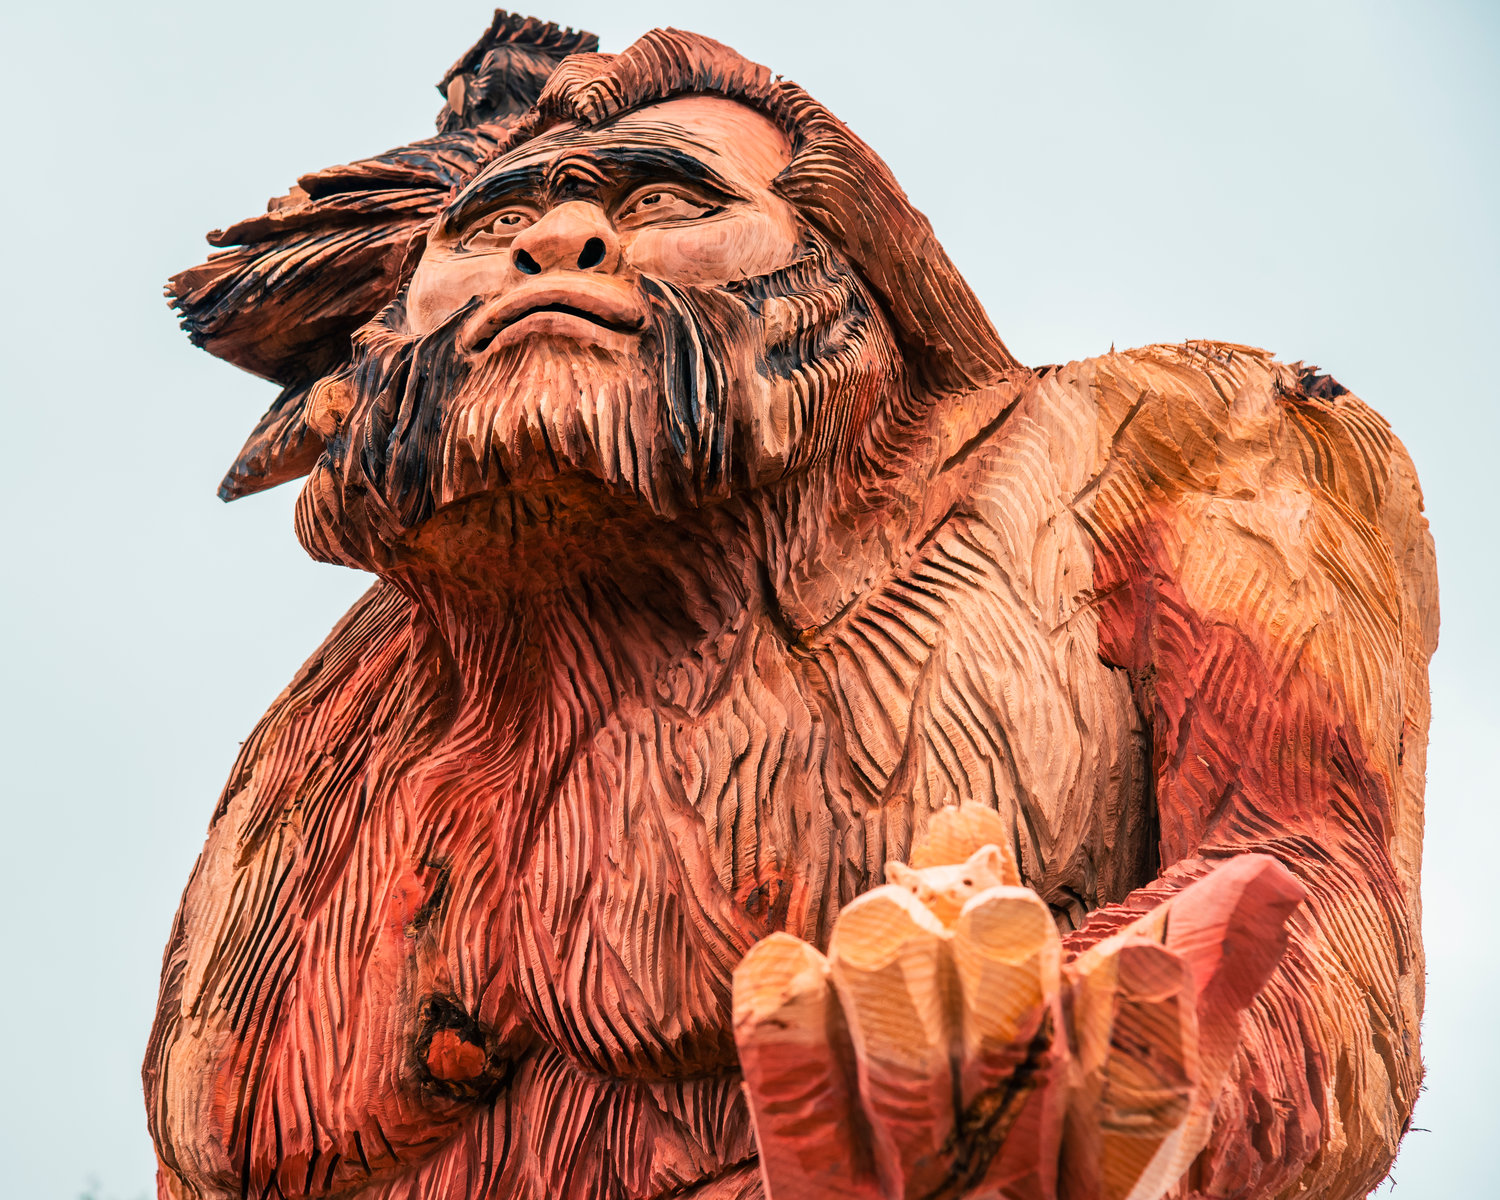 A 17-foot Sasquatch carved with chainsaws into a sequoia also features squirrel and owl carvings Sunday in downtown Oakville.